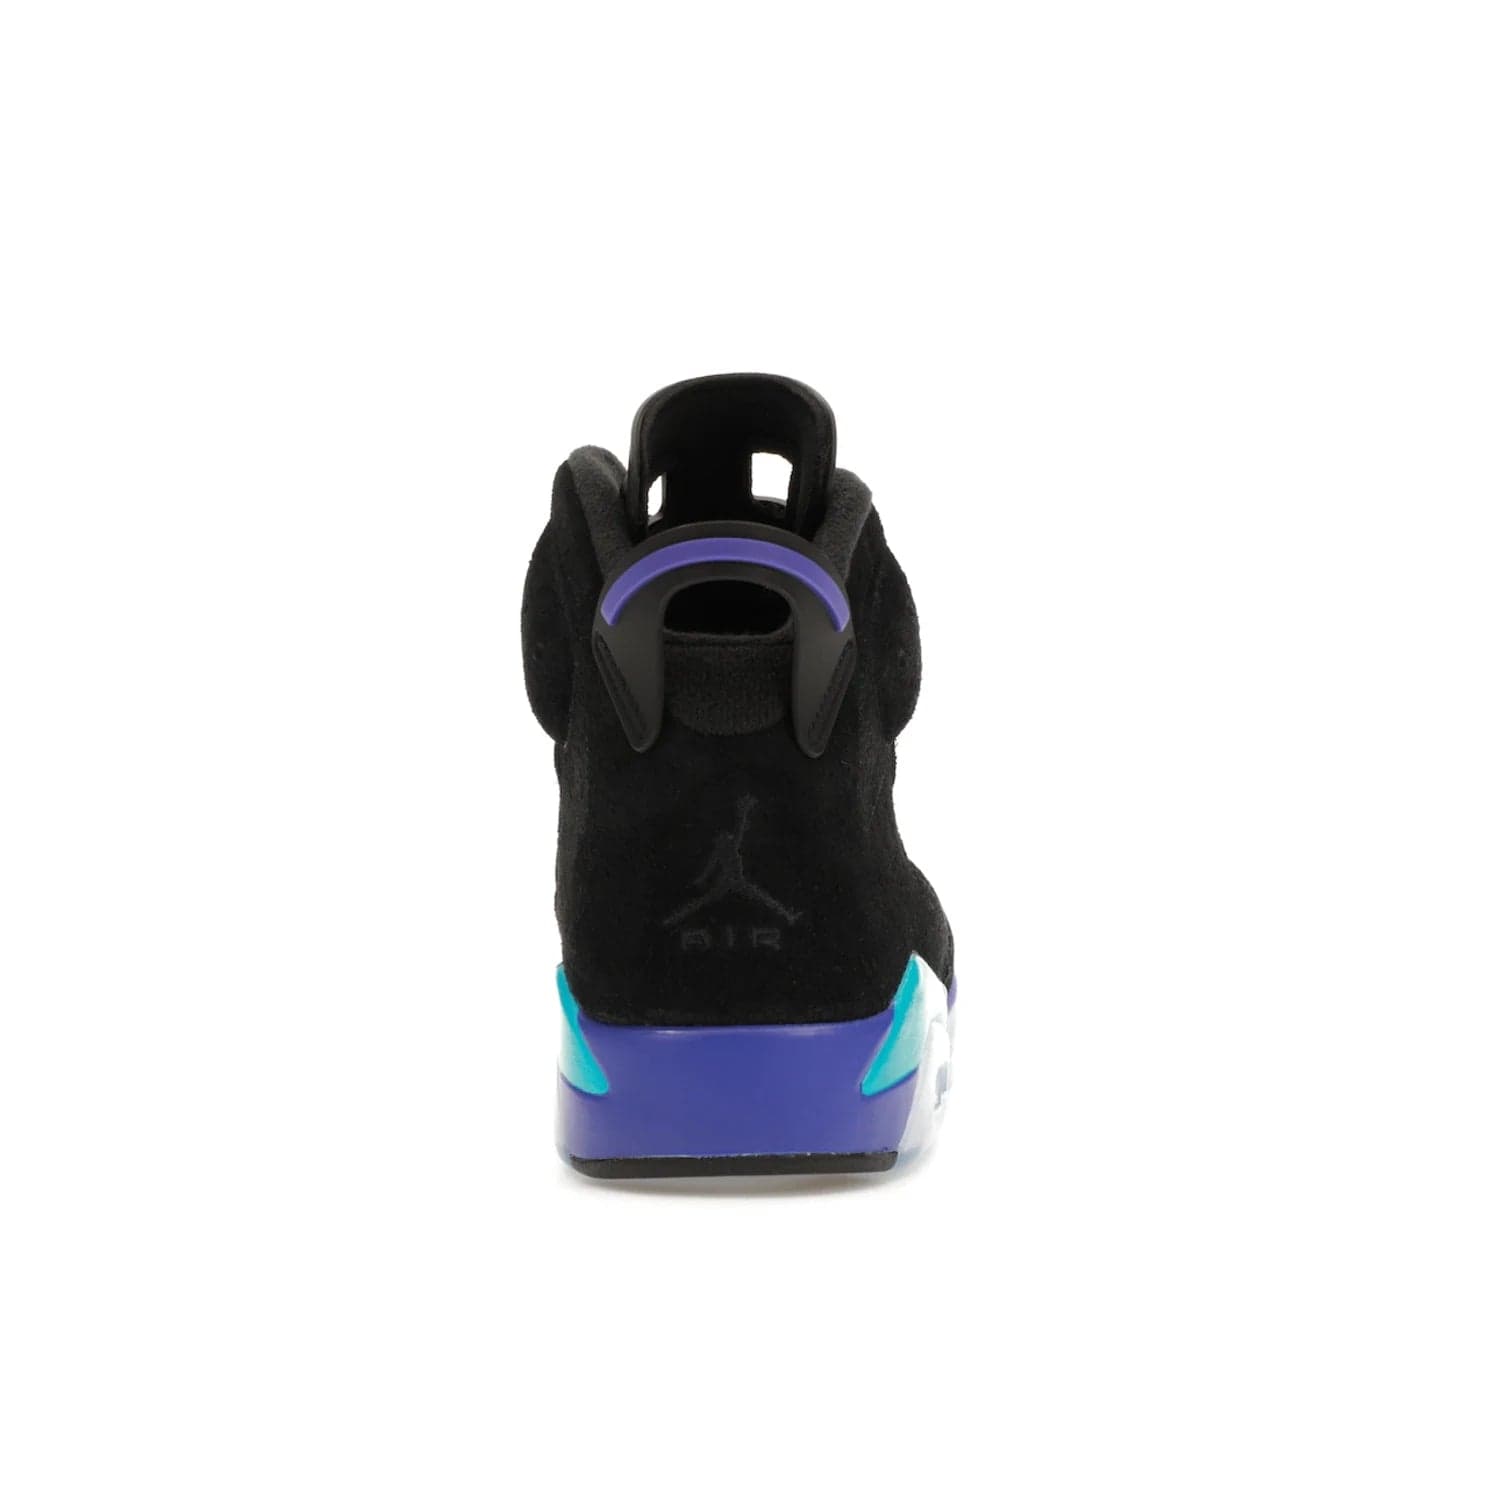 Jordan 6 Retro Aqua - Image 28 - Only at www.BallersClubKickz.com - Feel the classic Jordan 6 Retro Aqua paired with modern style. Black, Bright Concord, and Aquatone hues are crafted with a supple suede and rubberized heel tab. This standout sneaker adds signature Jordan elements at $200. Elevate your style with the Jordan 6 Retro Aqua.